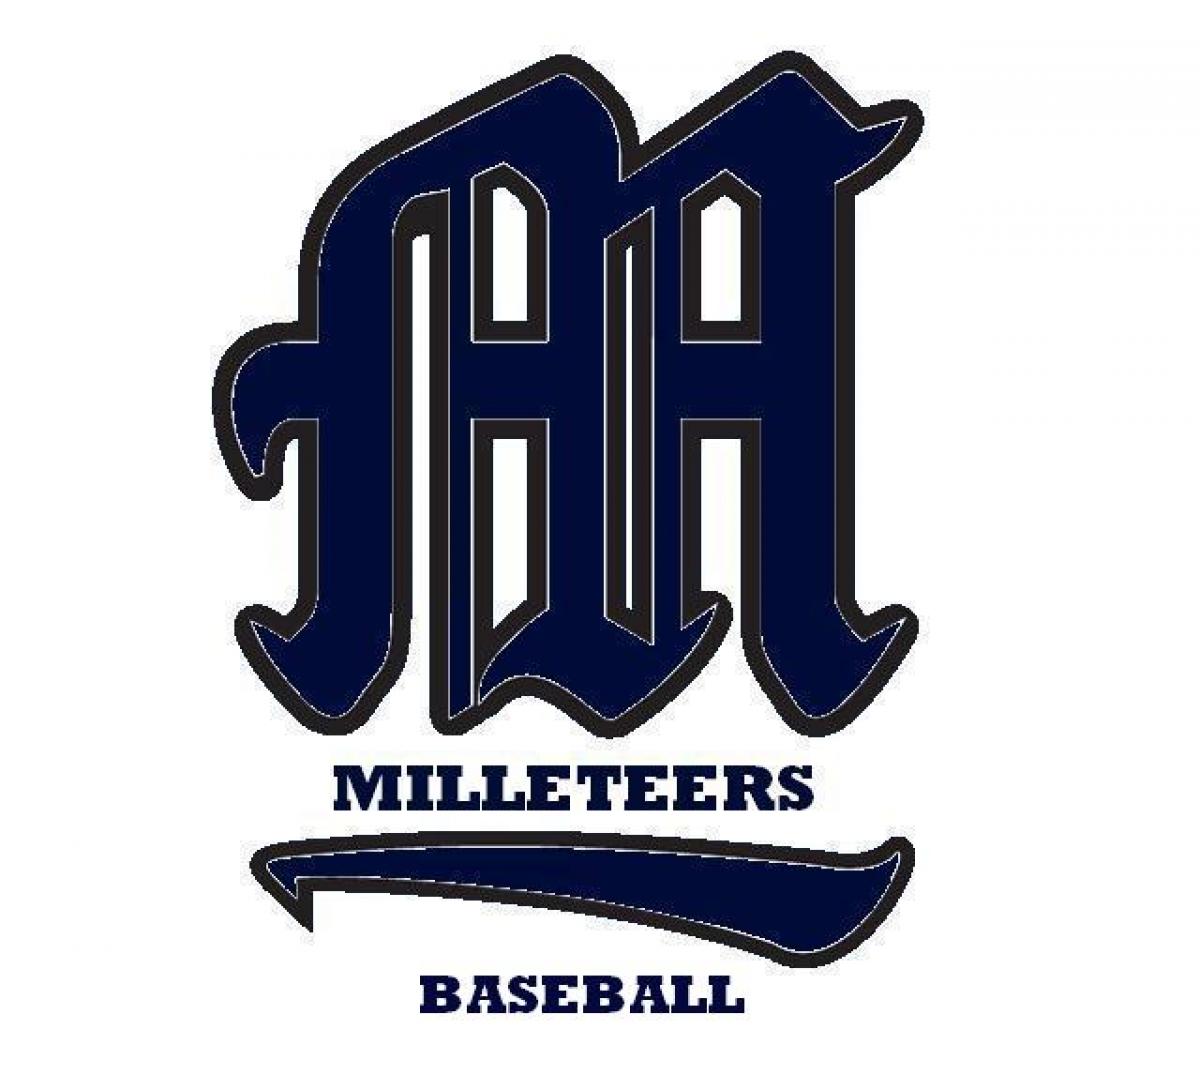 Milleteers Force Deciding Game